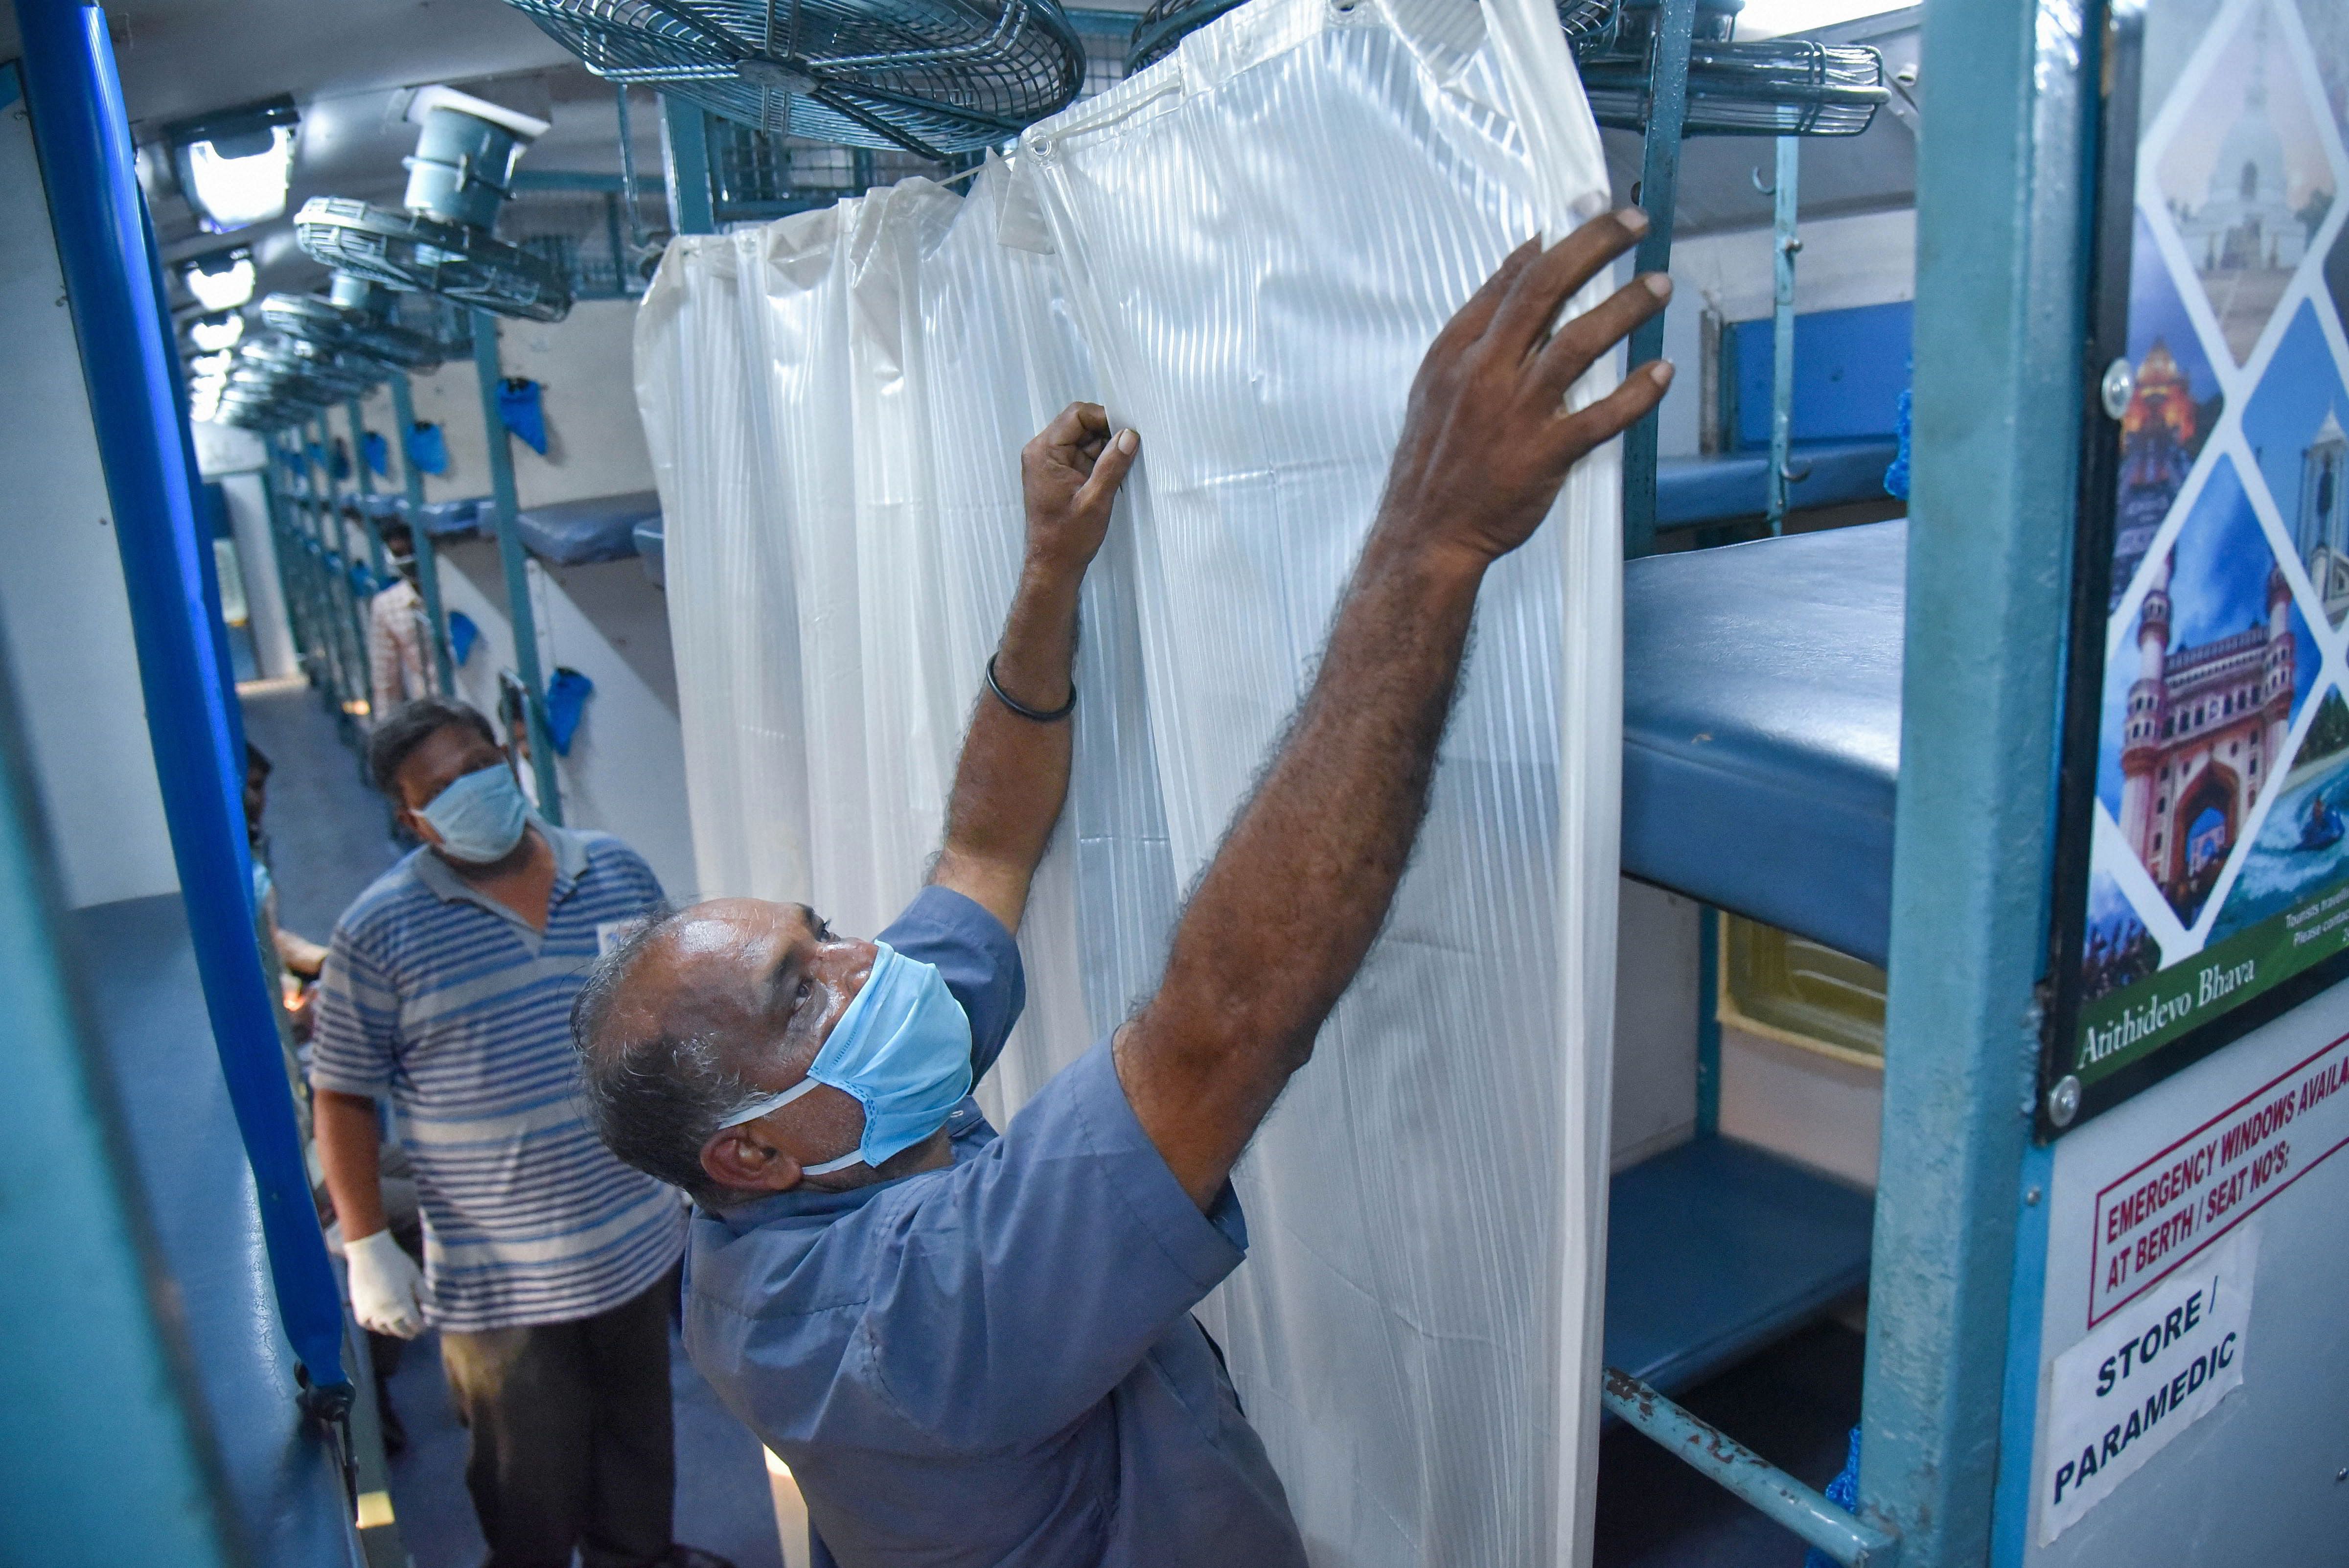 Workers put curtains on railway coaches to be converted into isolation wards for COVID-19 patients, during the nationwide lockdown. (PTI Photo)